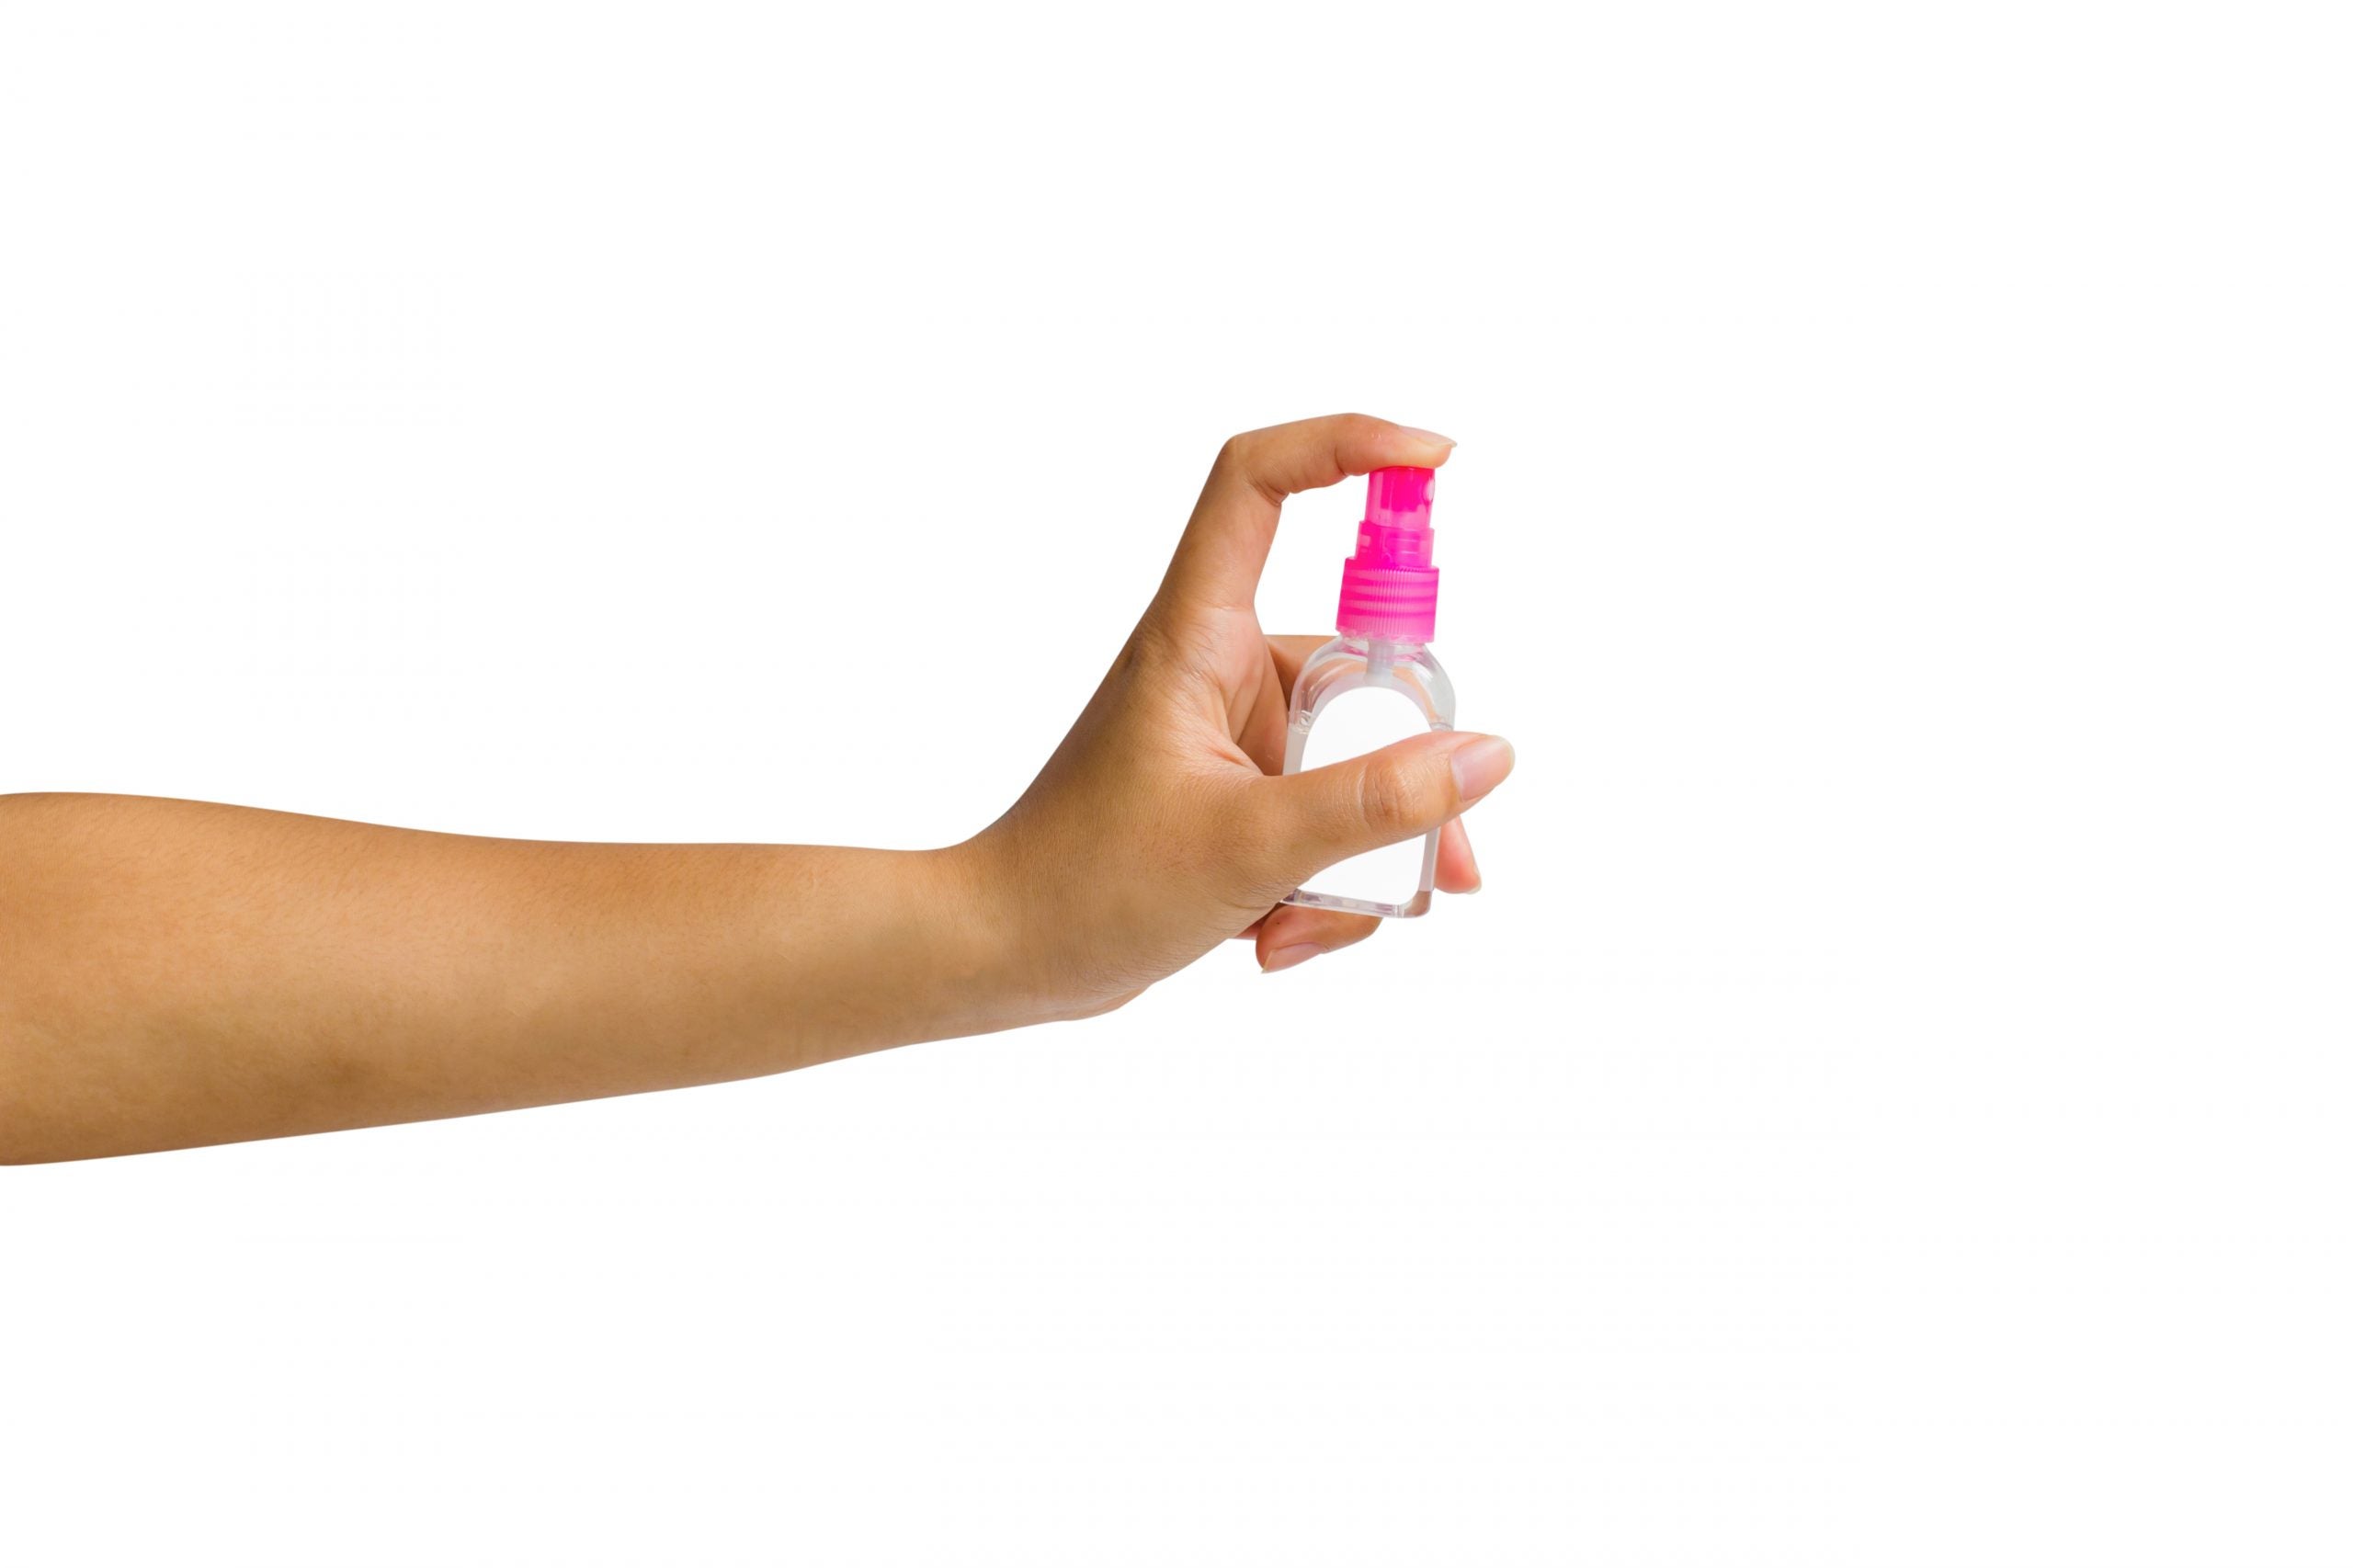 Beware! The FDA Warns Some Hand Sanitizers May Be Toxic